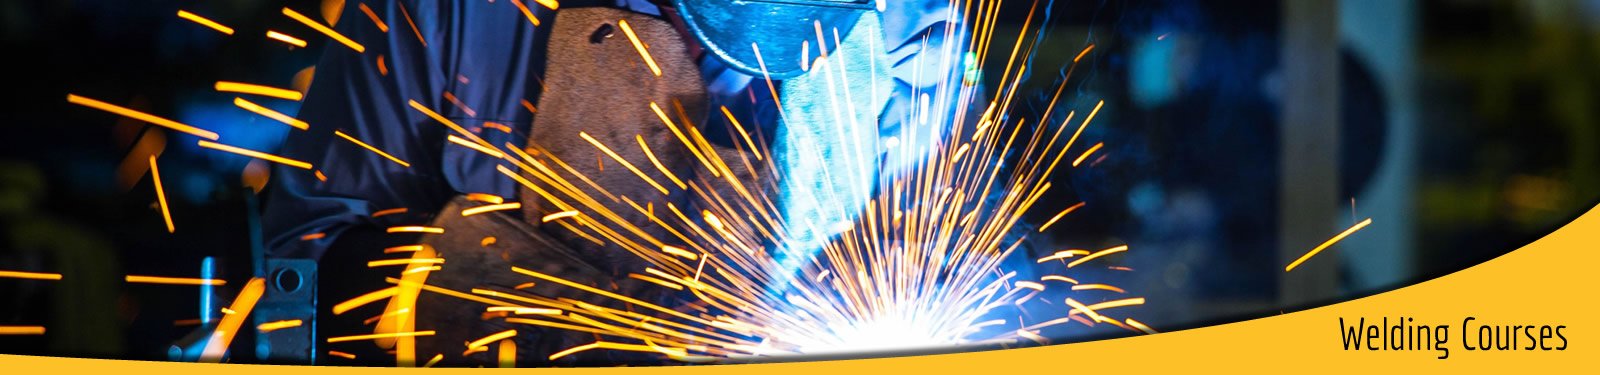 New To Welding, Introductory Courses